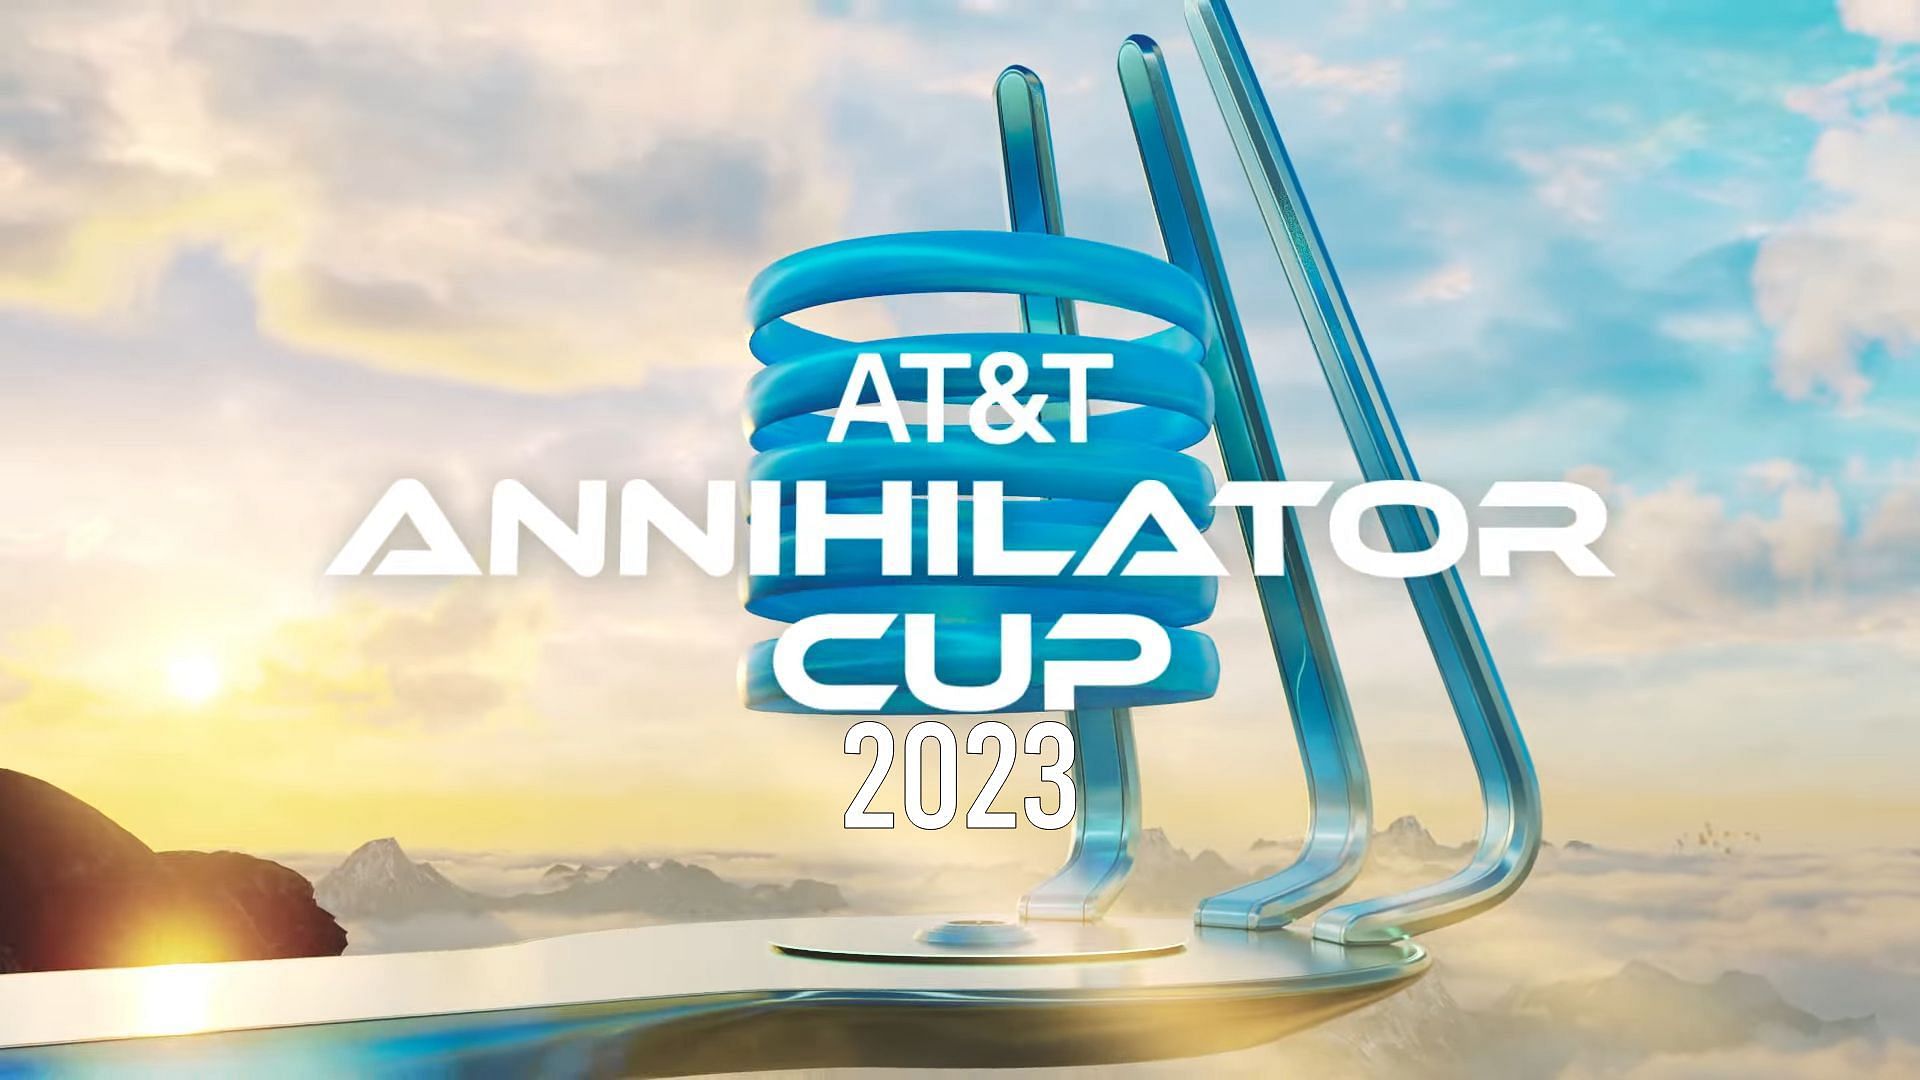 The 2023 AT&T Annihilator Cup has been announced, featuring big